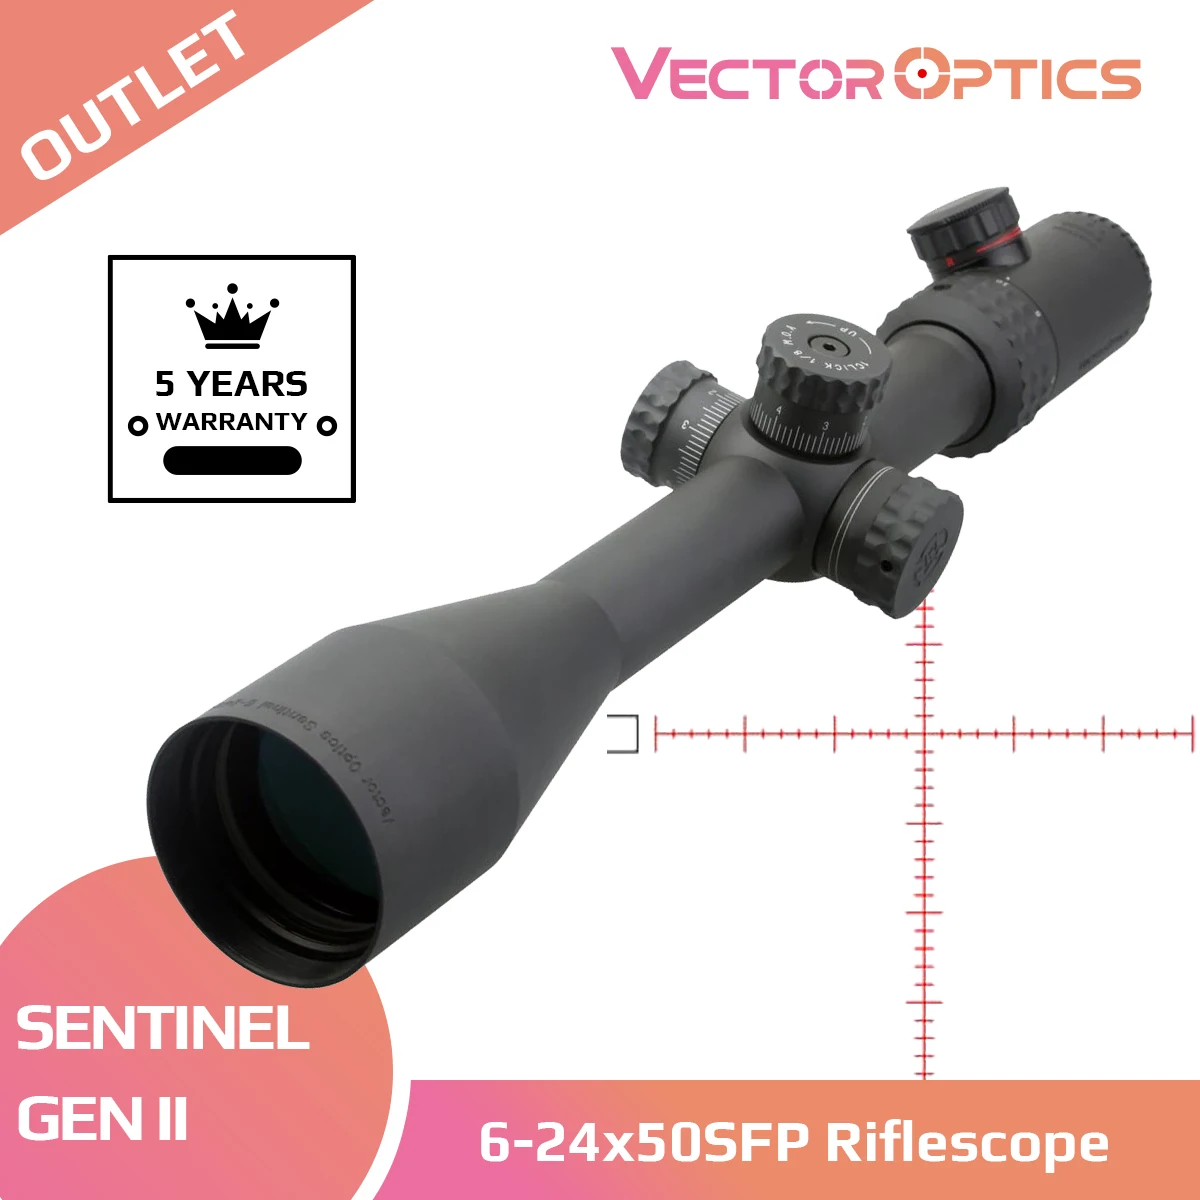 

Vector Optics Sentinel 6-24x50 MOA Riflescope Illumination Tactical Target Shooting Tested on Real Firearms Airgun Shock Proof